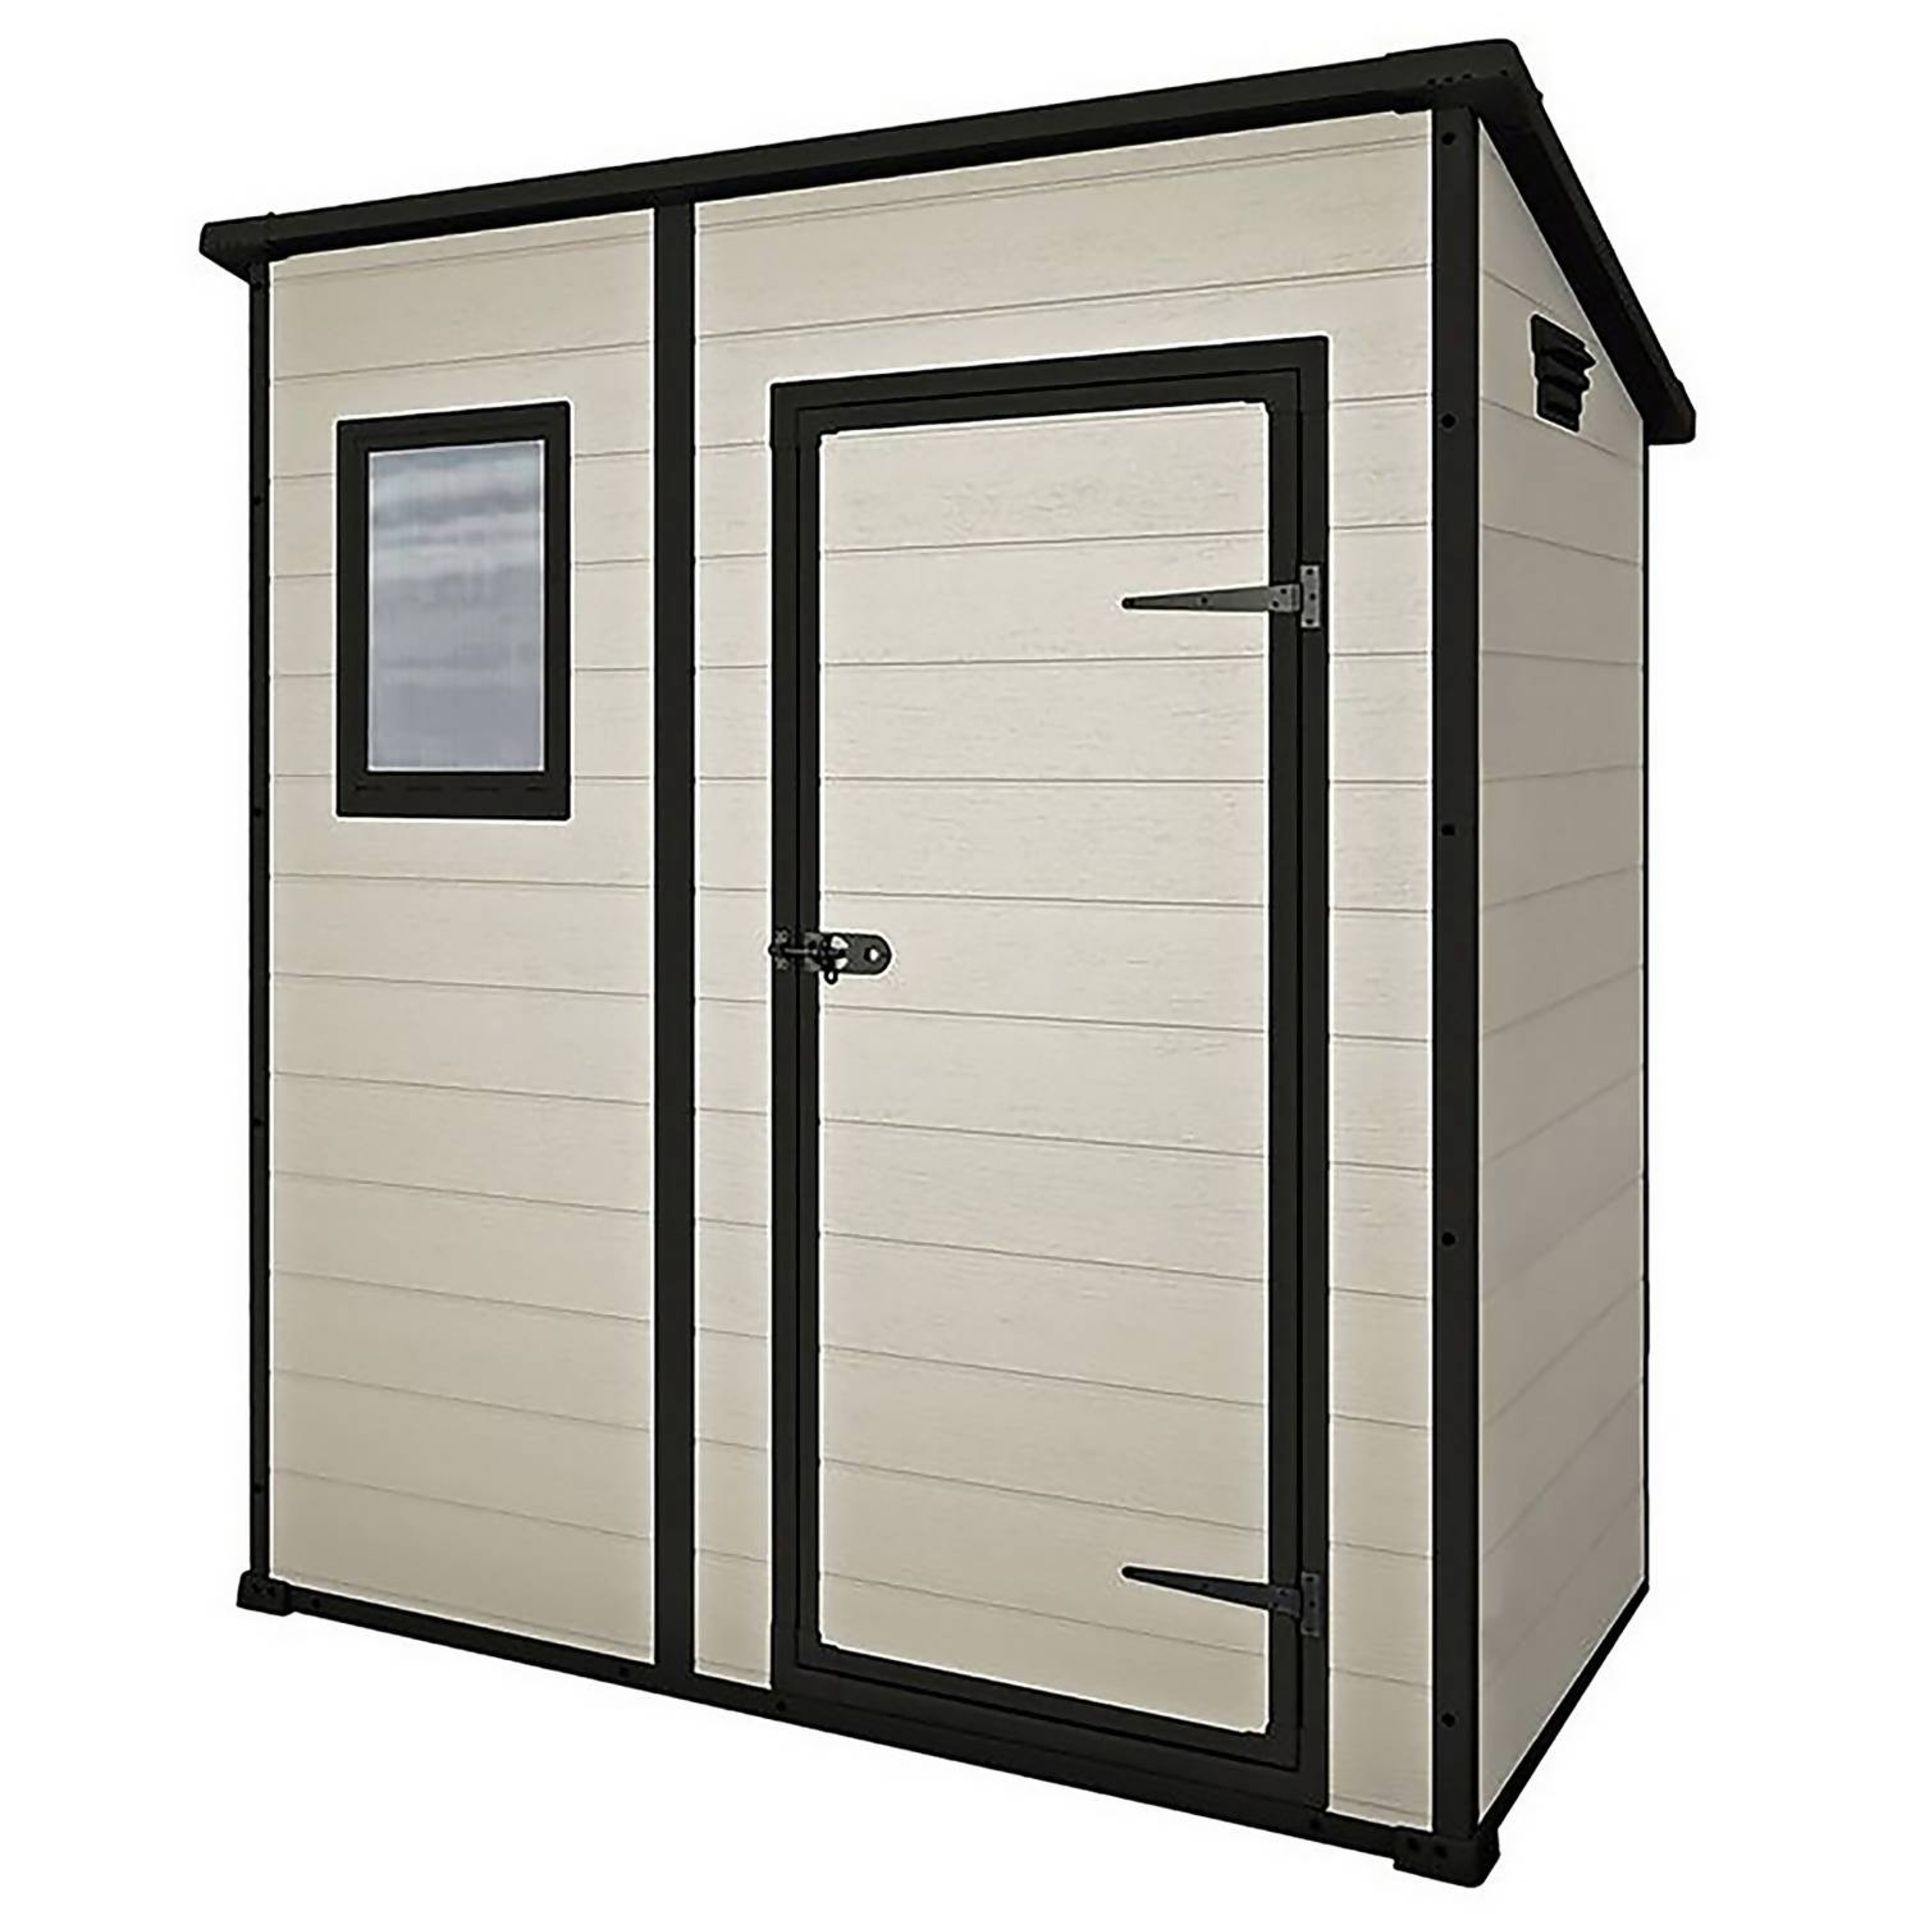 (P8) 1x Keter Manor Pent Shed Beige / Brown 6x4 RRP £375. Unit Still Factory Banded